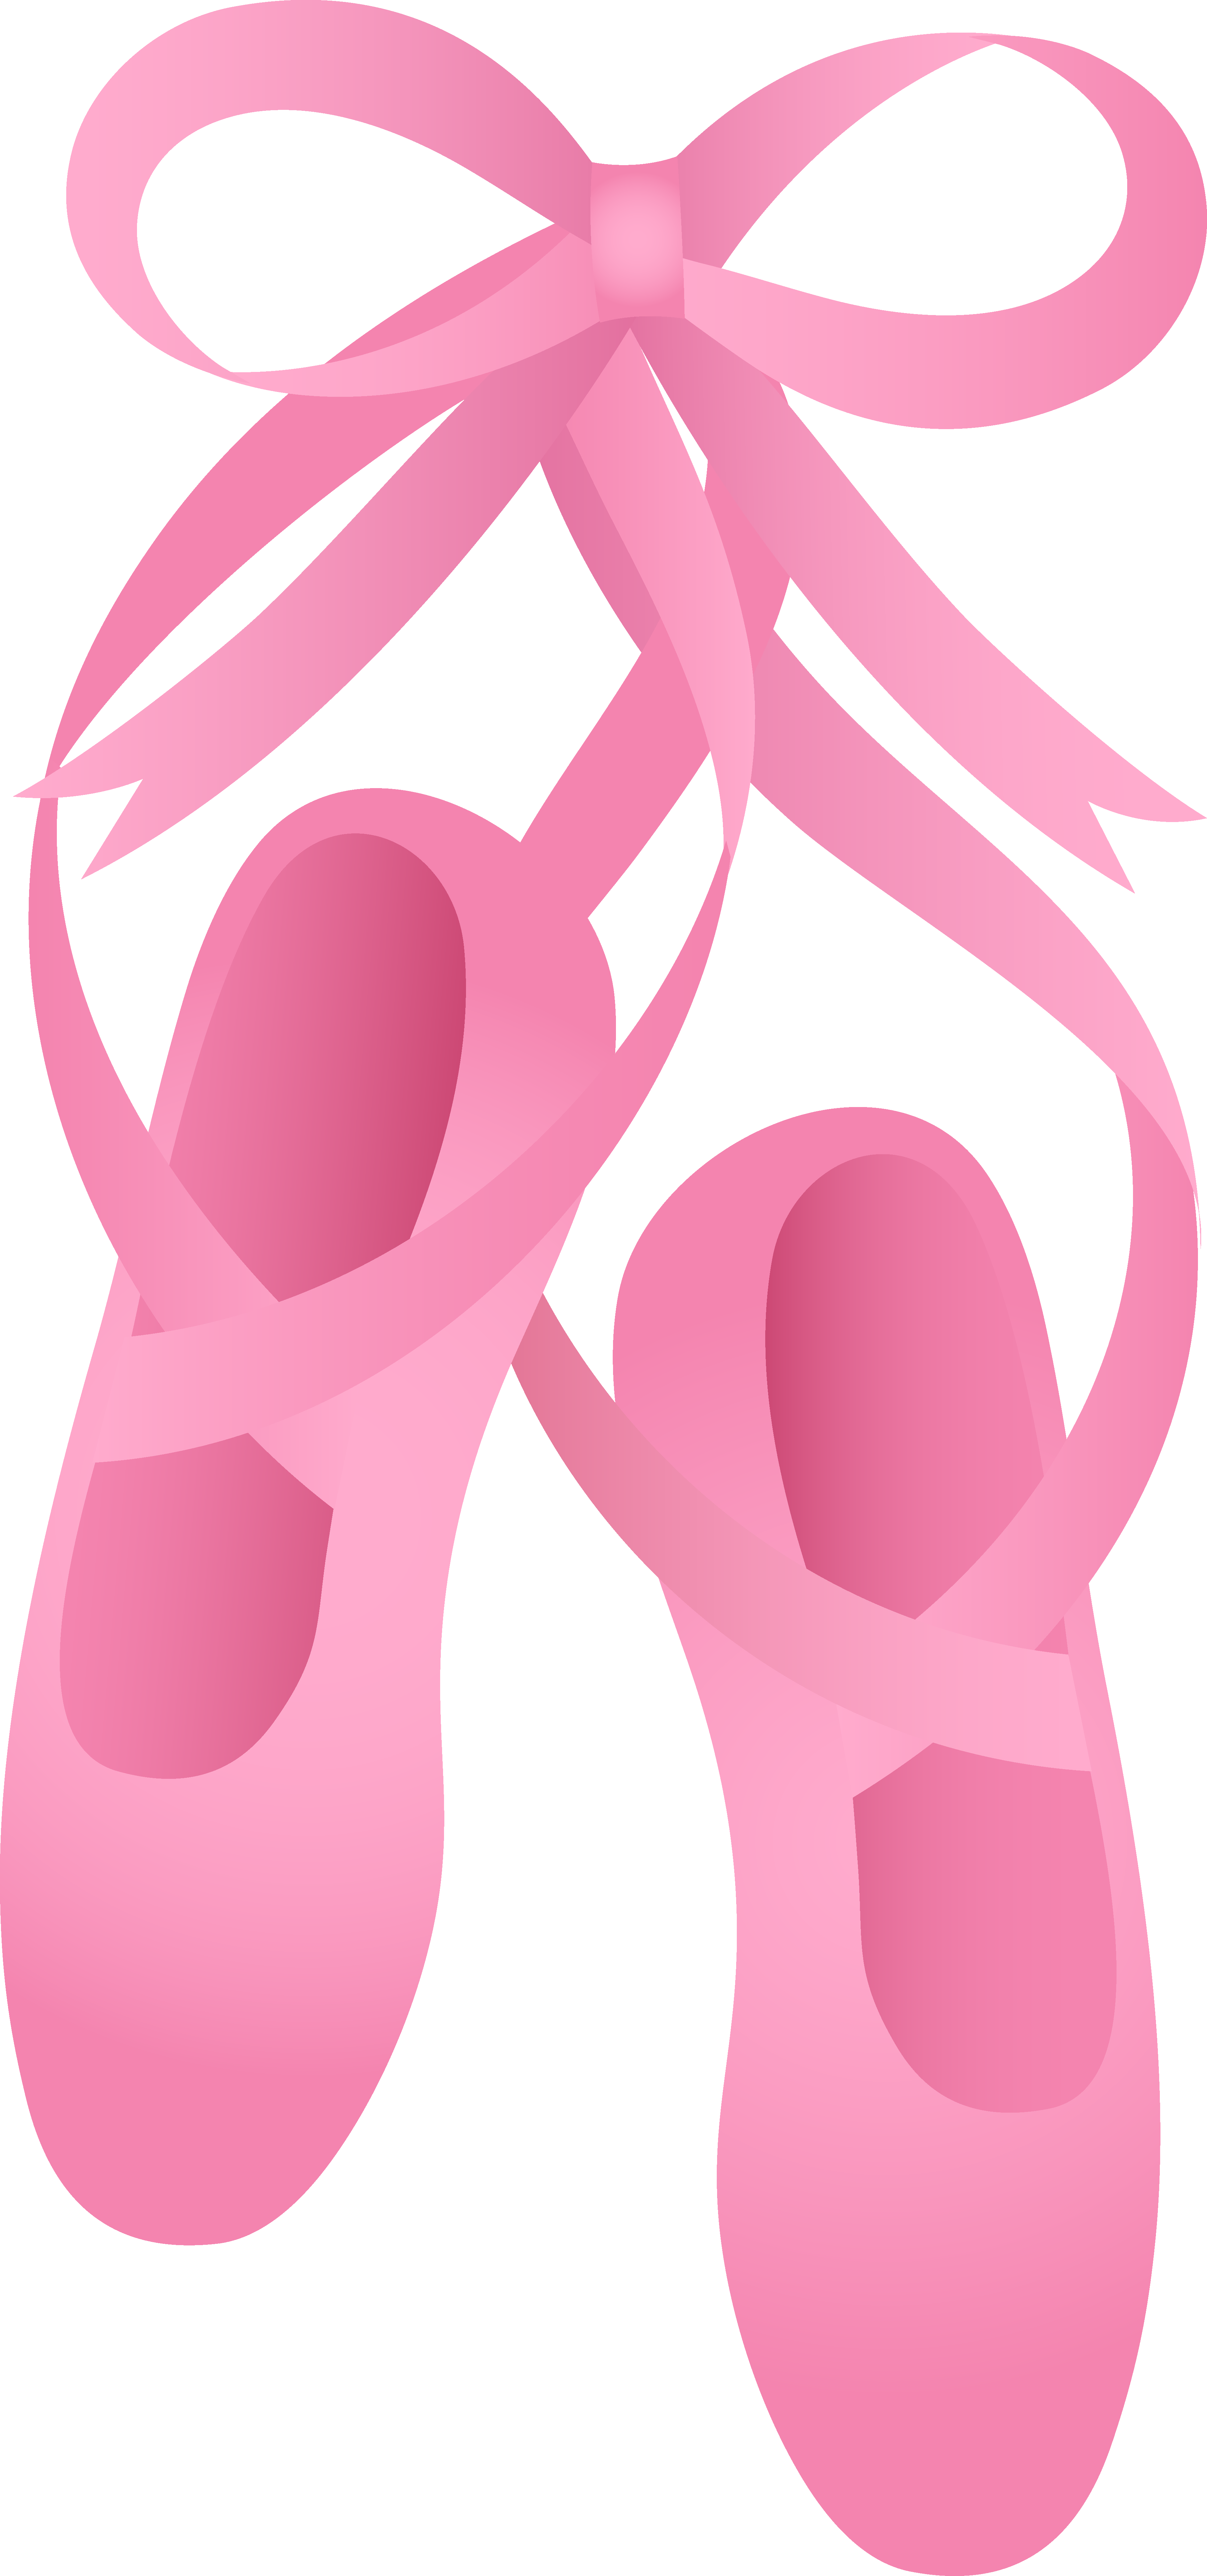 Pair of Pink Ballet Slippers - Free Clip Art